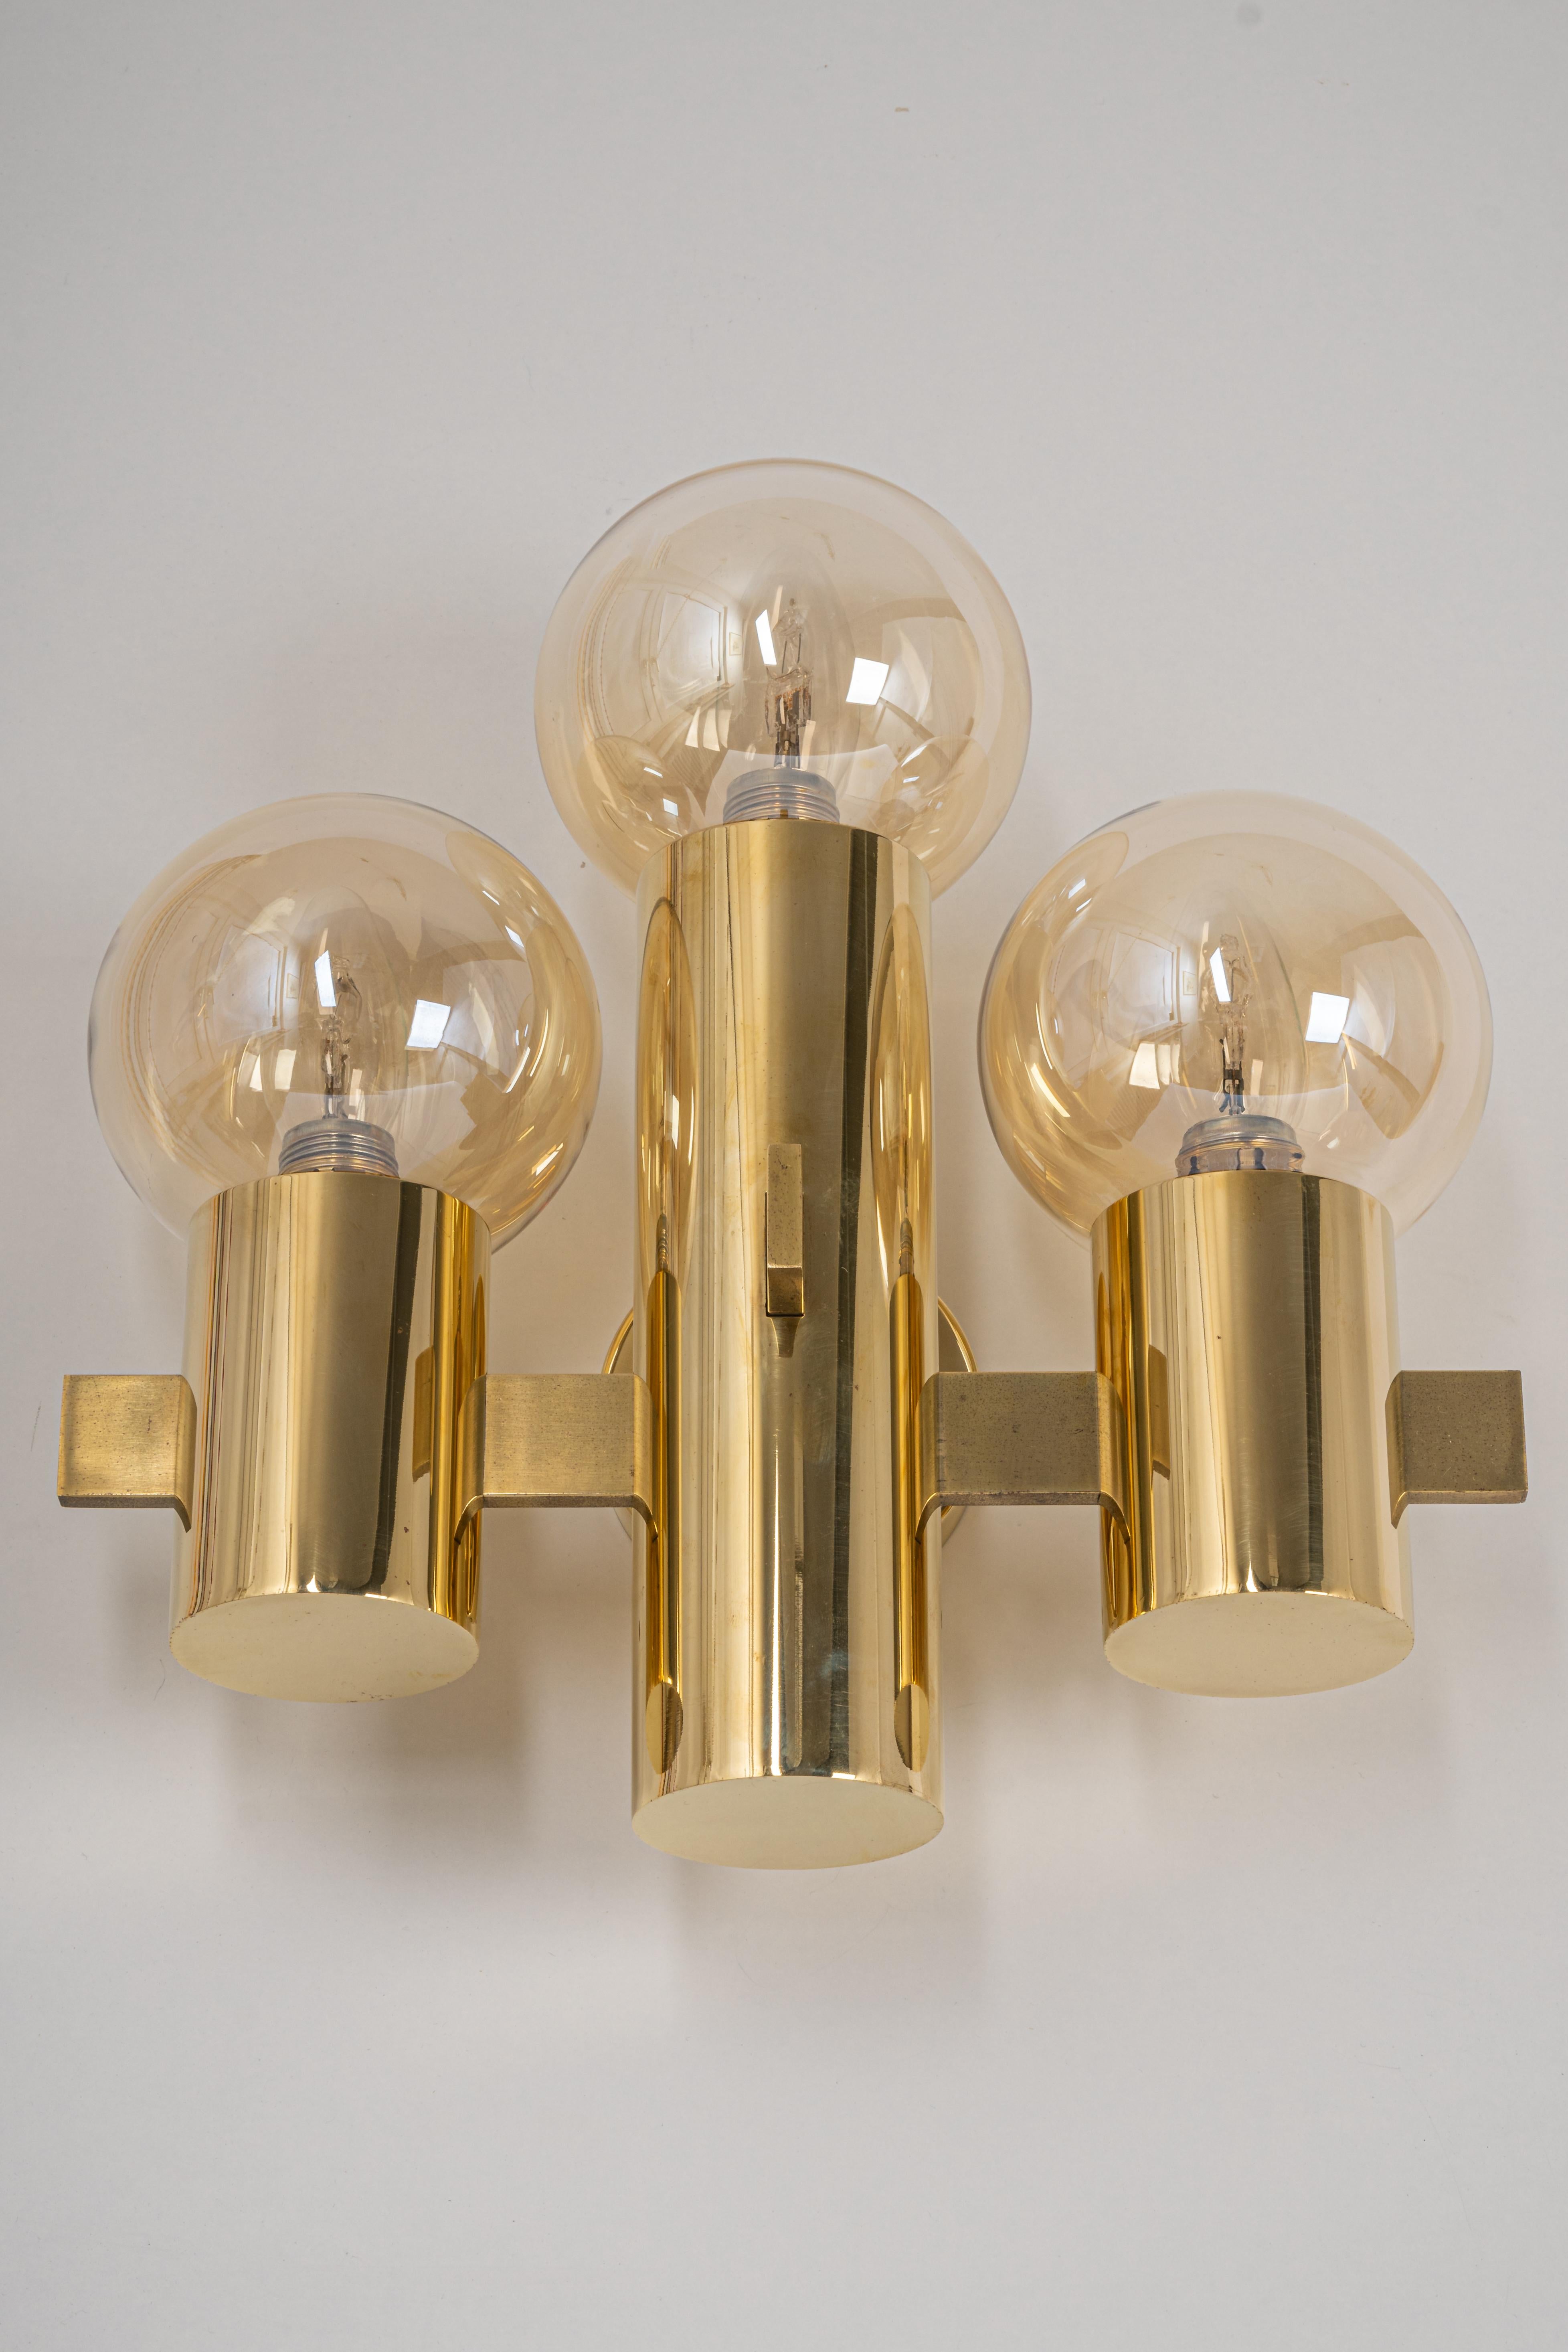 Pair of wall sconces in the manner of Sciolari, Italy, 1960s.
Each sconce is composed of one smoked glass with a brass base.

High quality and in very good condition. Cleaned, well-wired, and ready to use. 
Each sconce requires 3 x E14 standard